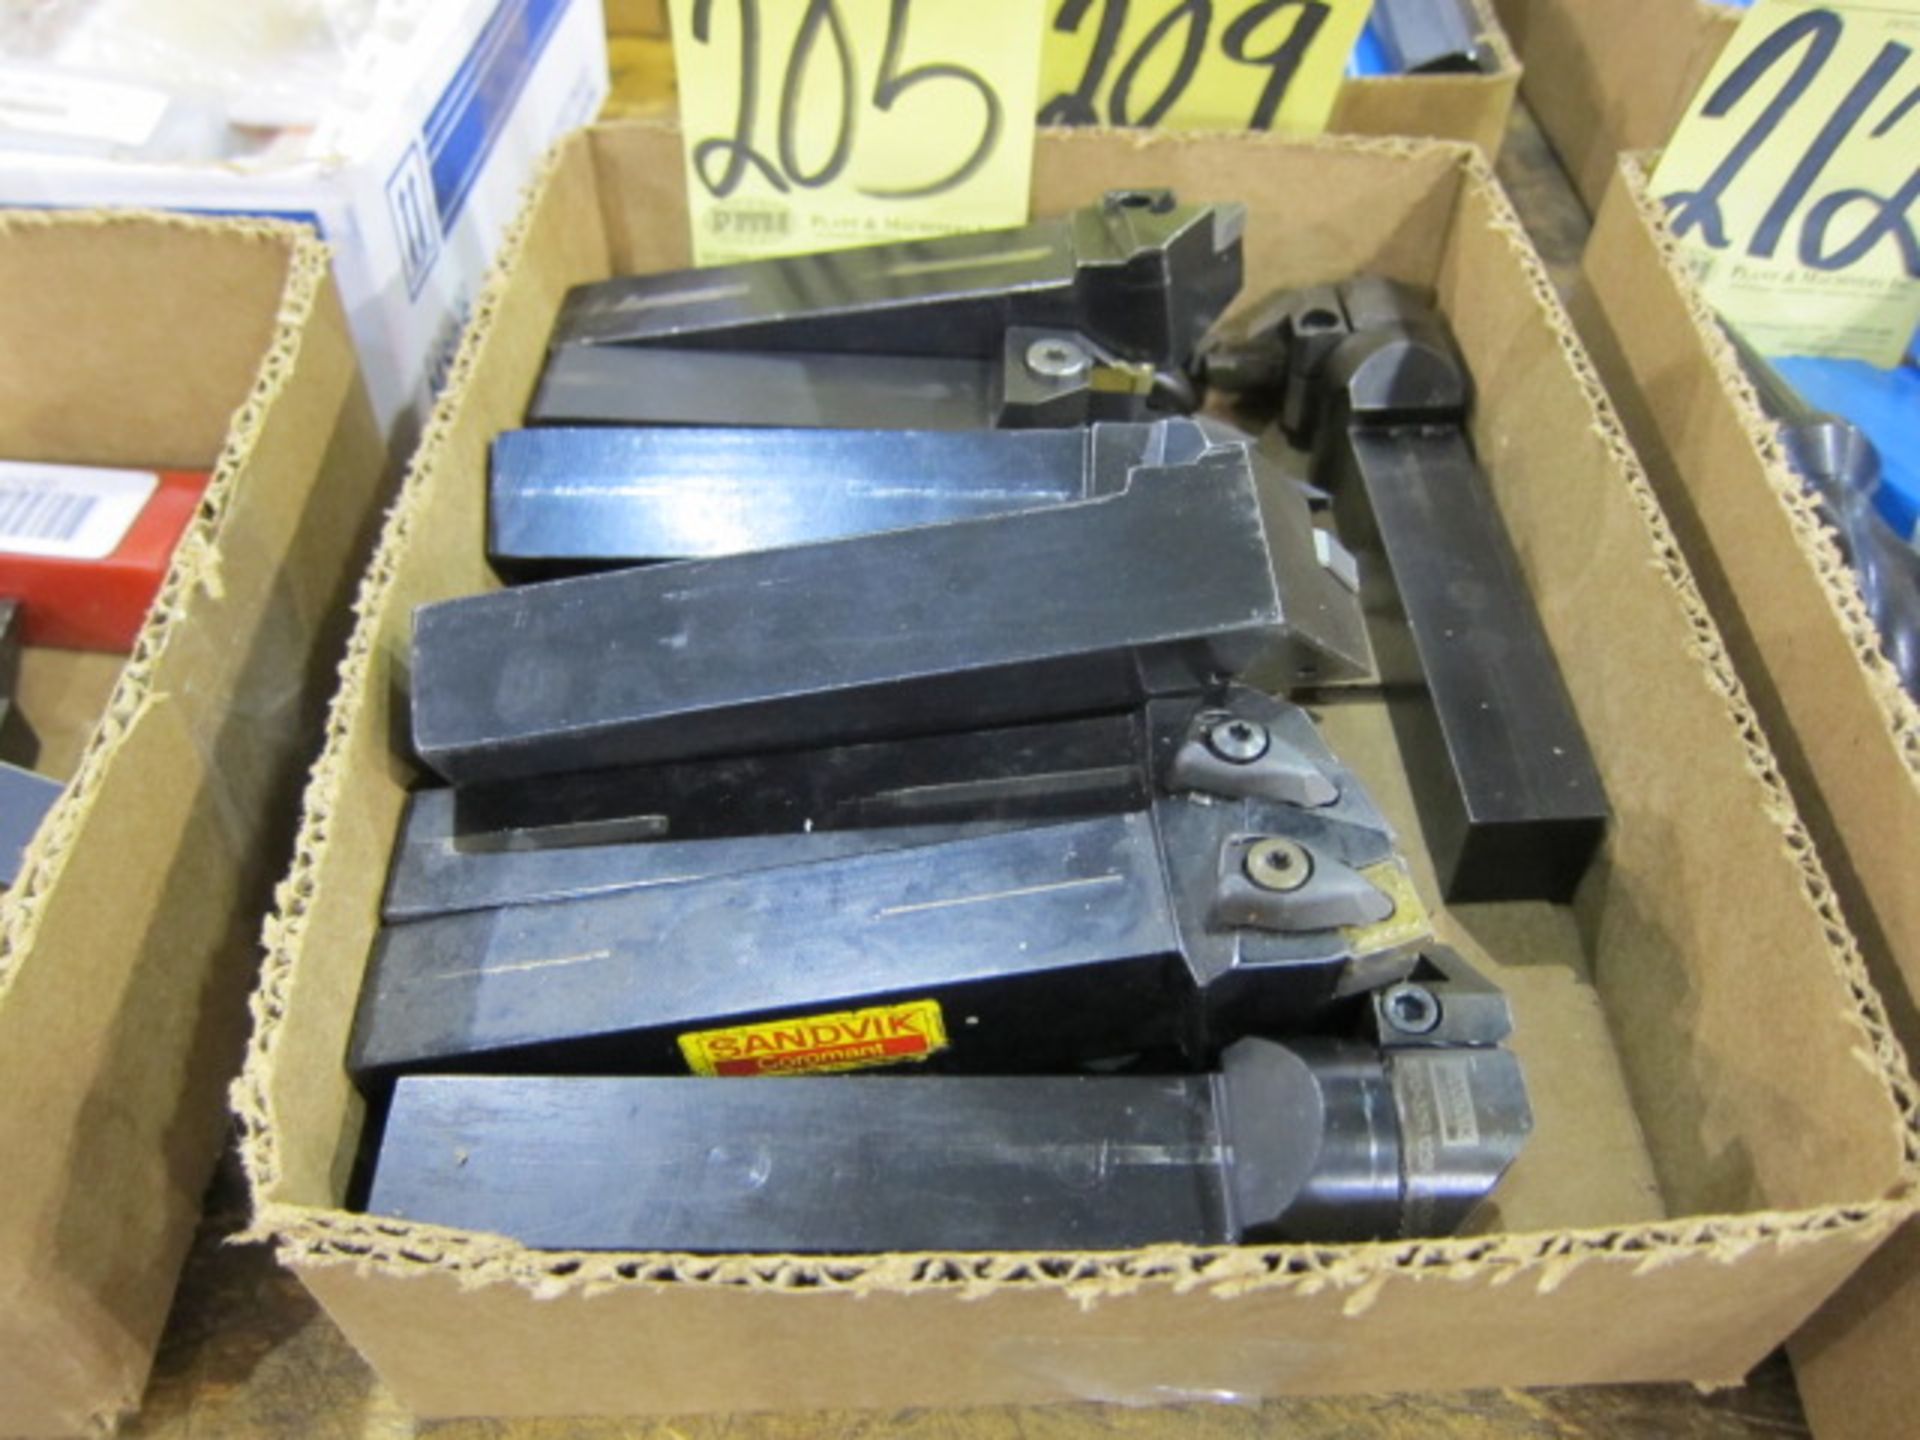 LOT OF INSERT TOOL HOLDERS, assorted (in one box)